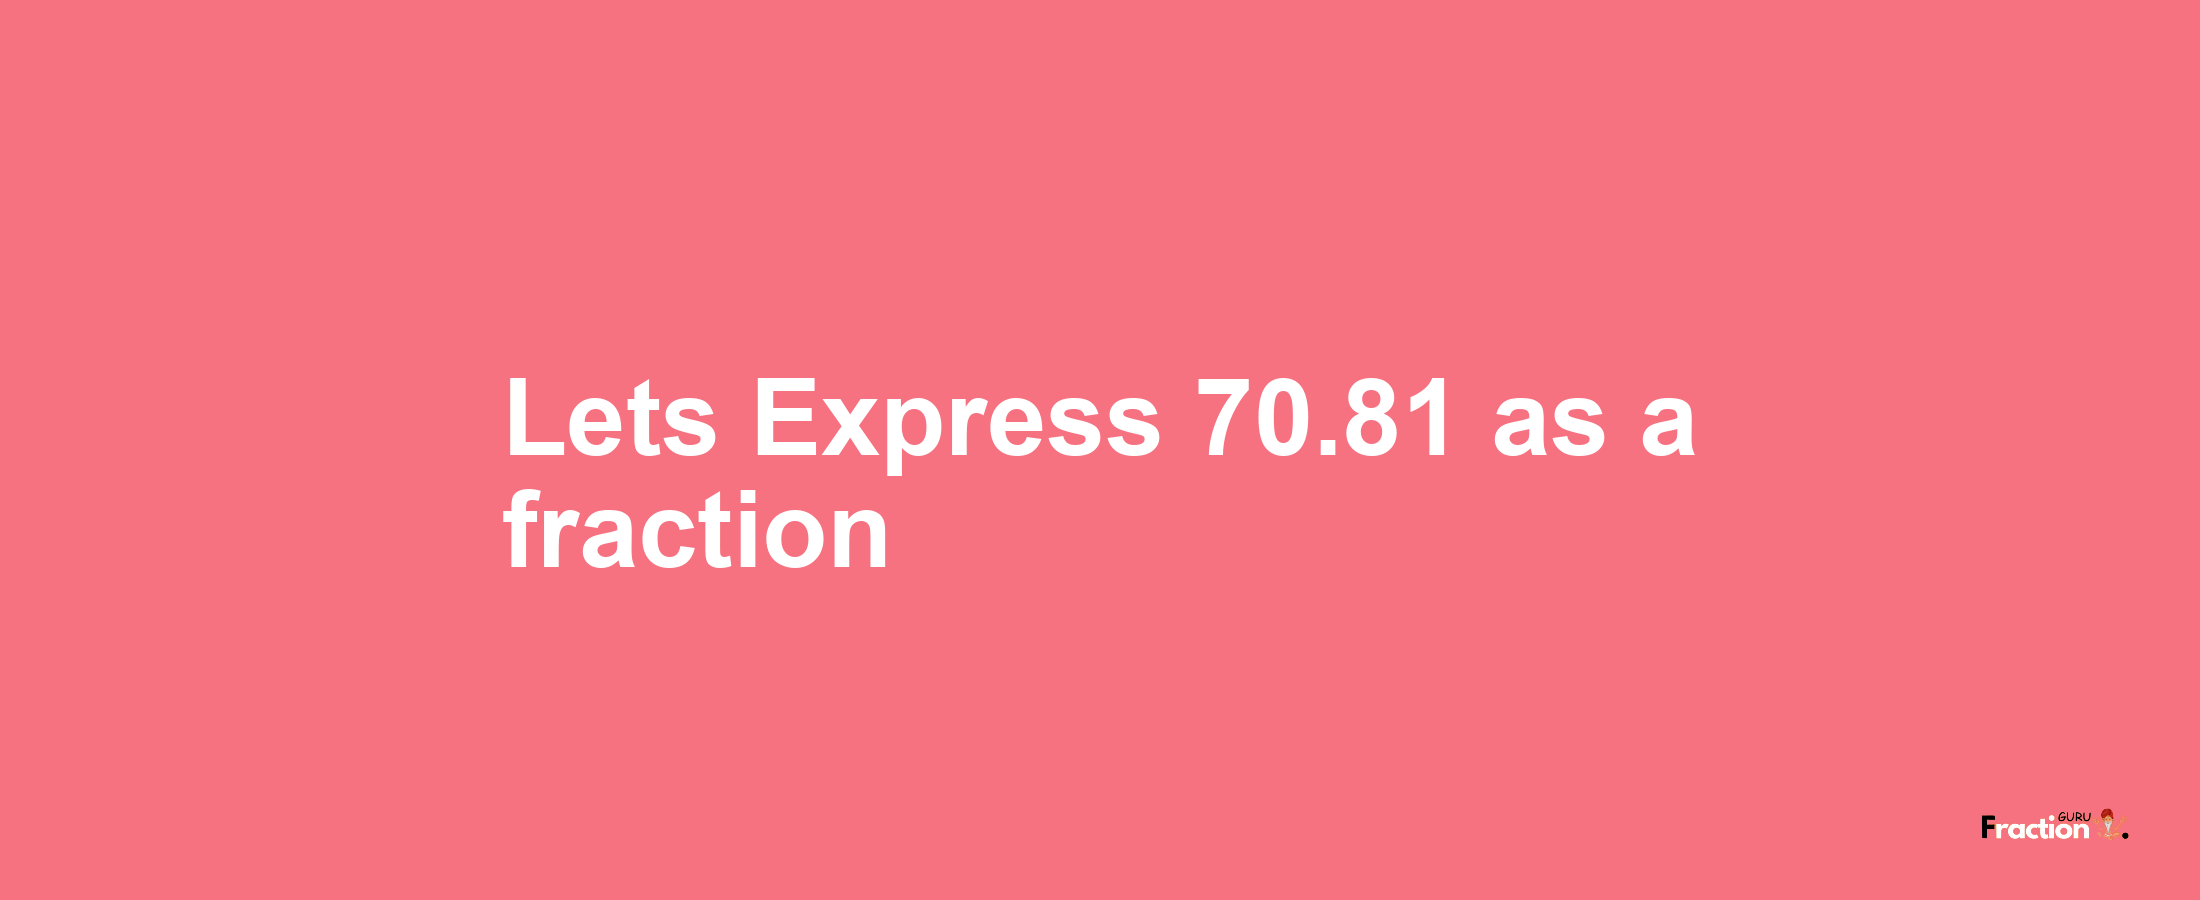 Lets Express 70.81 as afraction